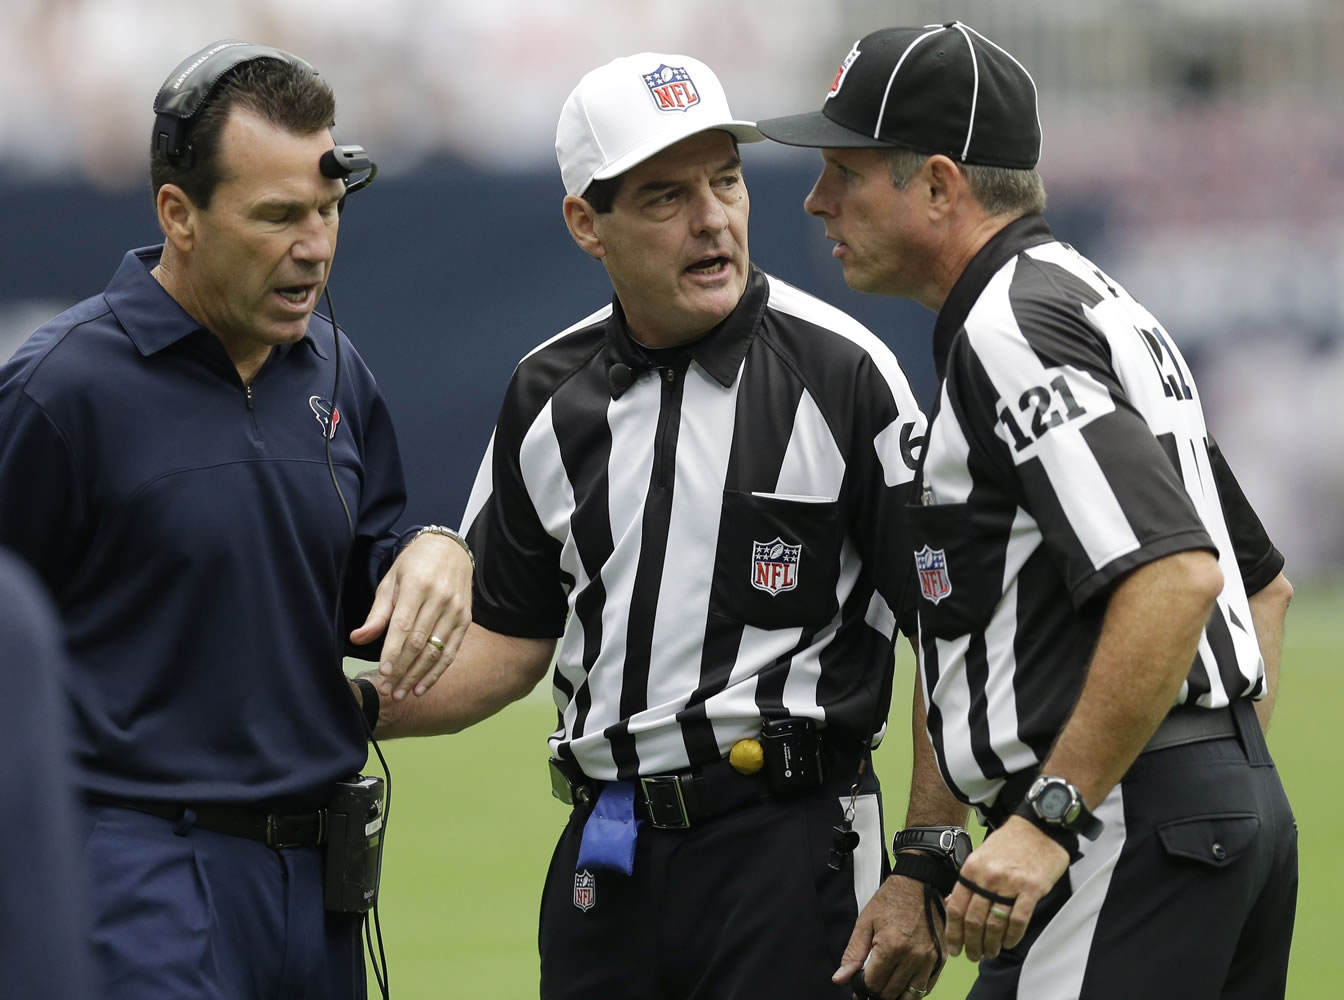 Houston Texans coach Gary Kubiak, left, discusses a play with referees Don King (60) and Curtis Townsend (121) in the first quarter of an NFL football game against the Miami Dolphins, Sunday, Sept. 9, 2012, in Houston. (AP Photo/David J.